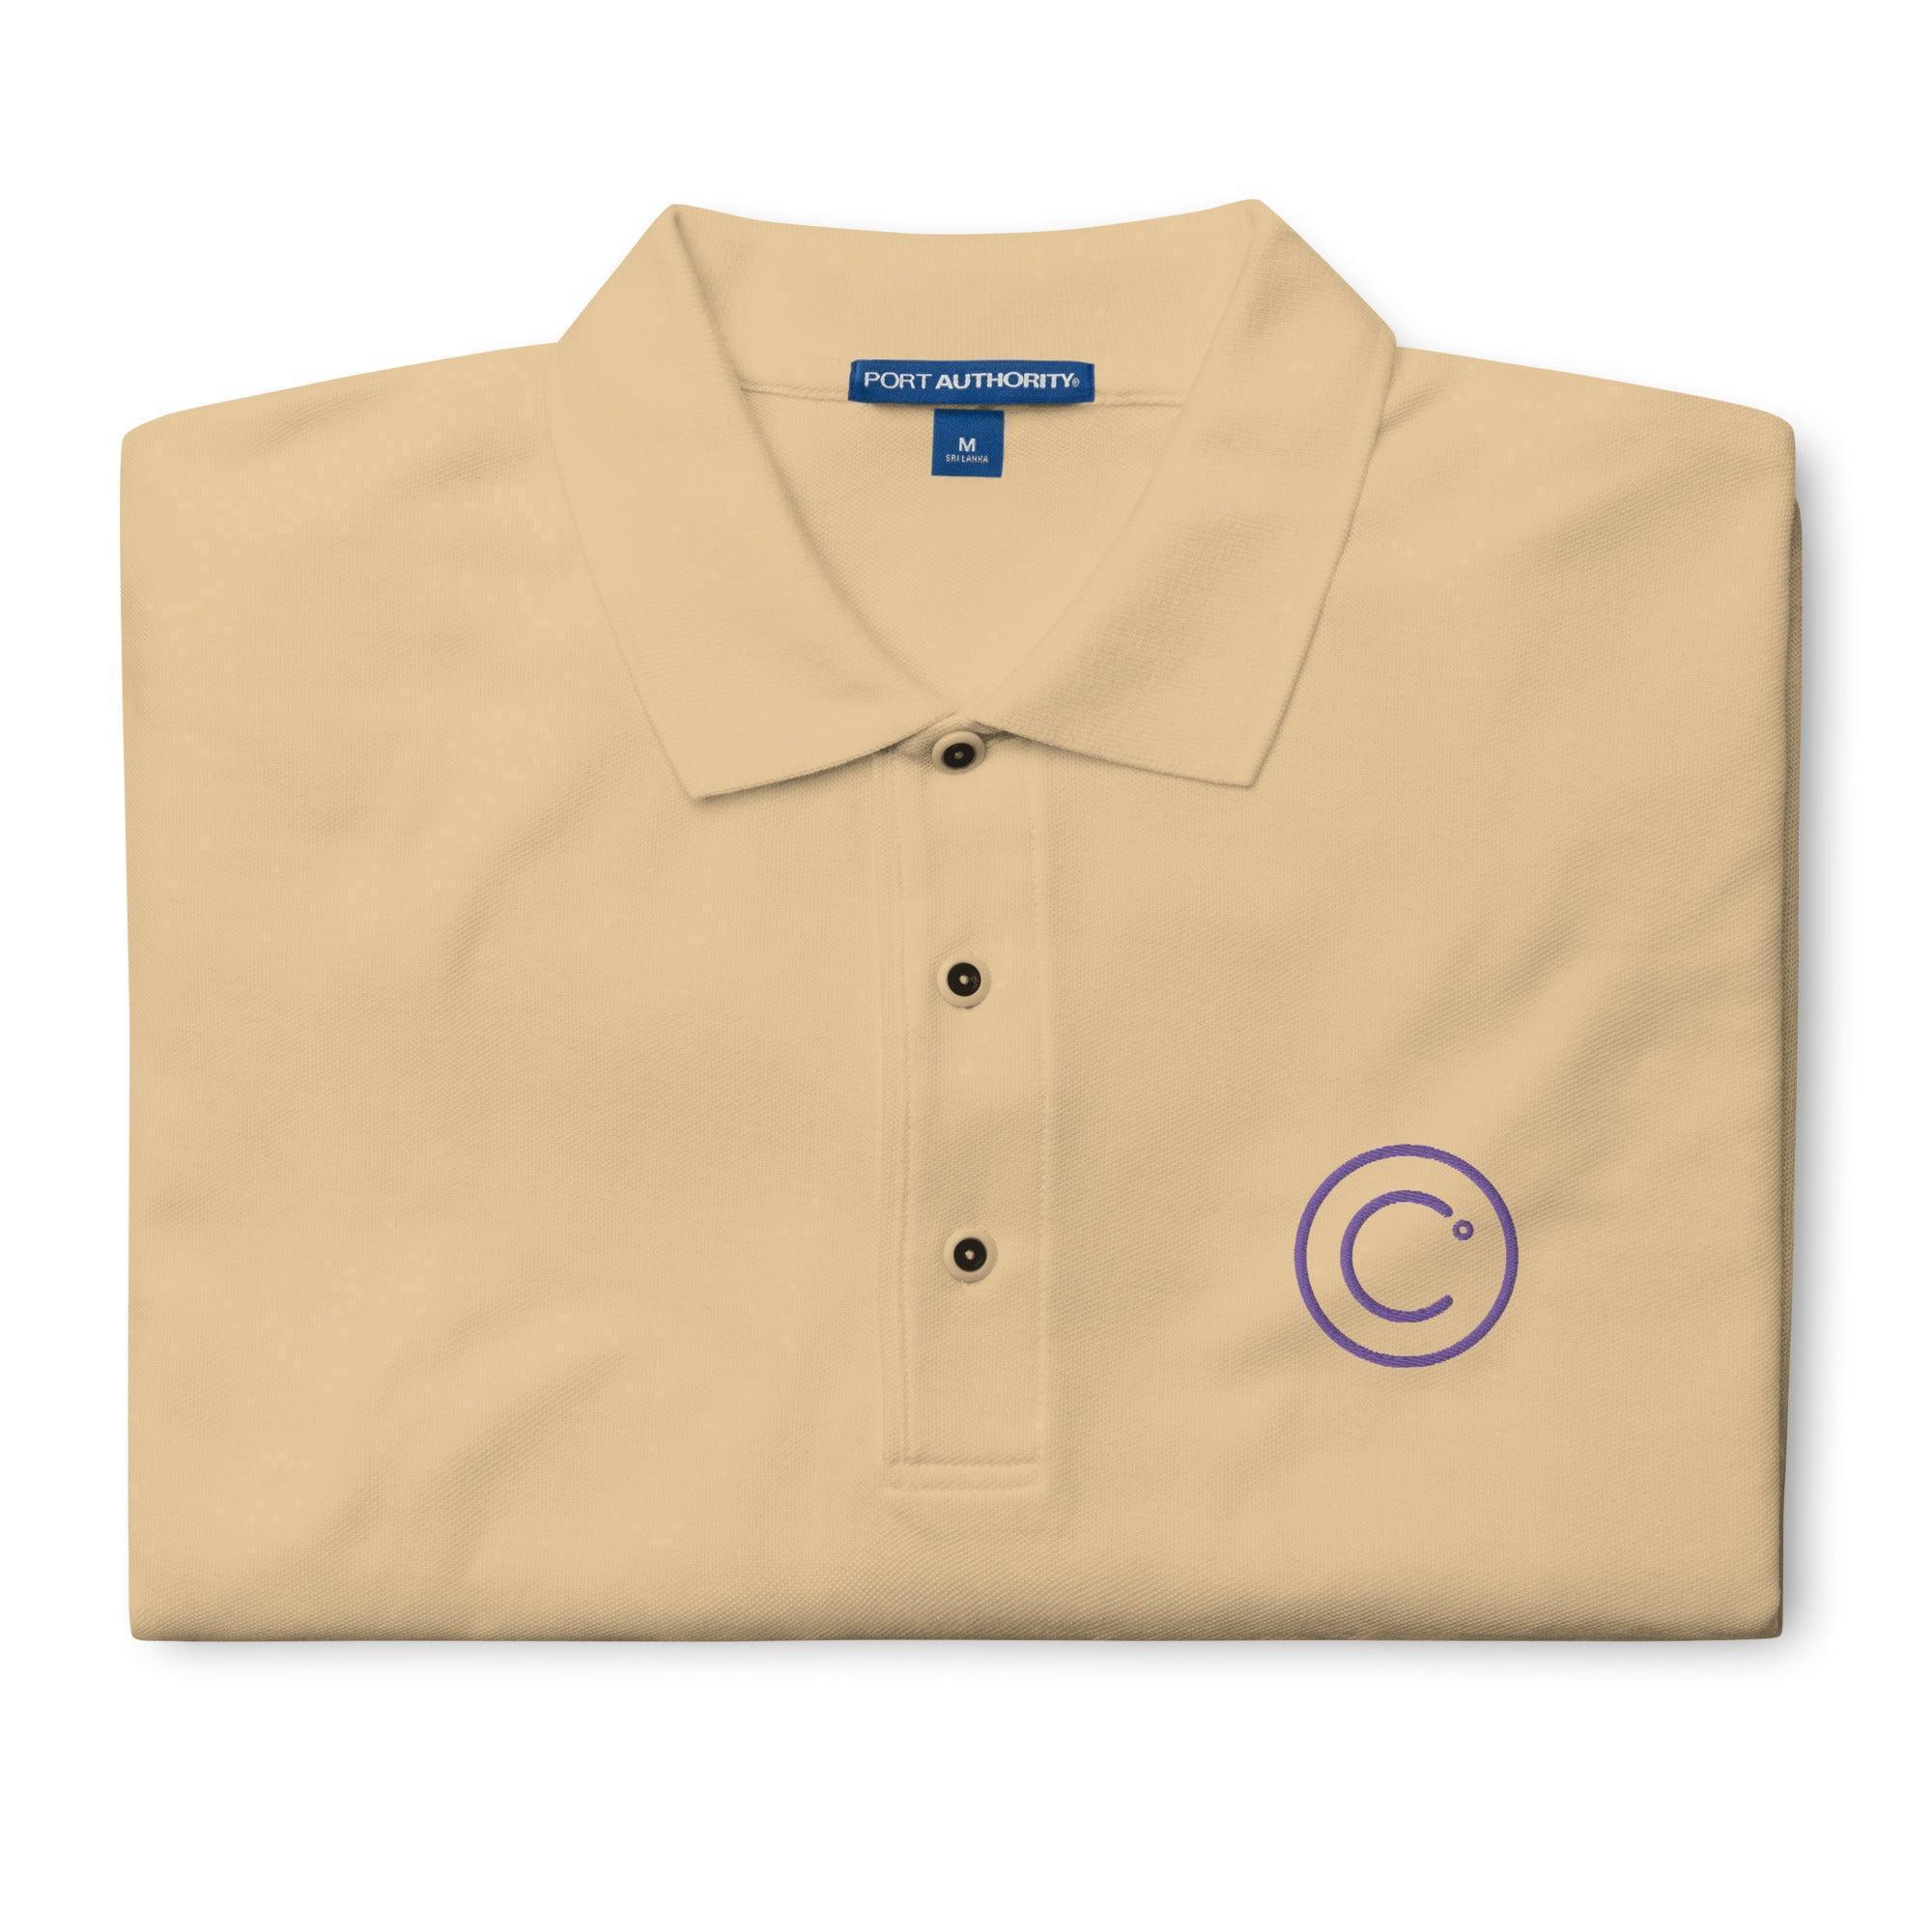 Celsius Polo Shirt - InvestmenTees